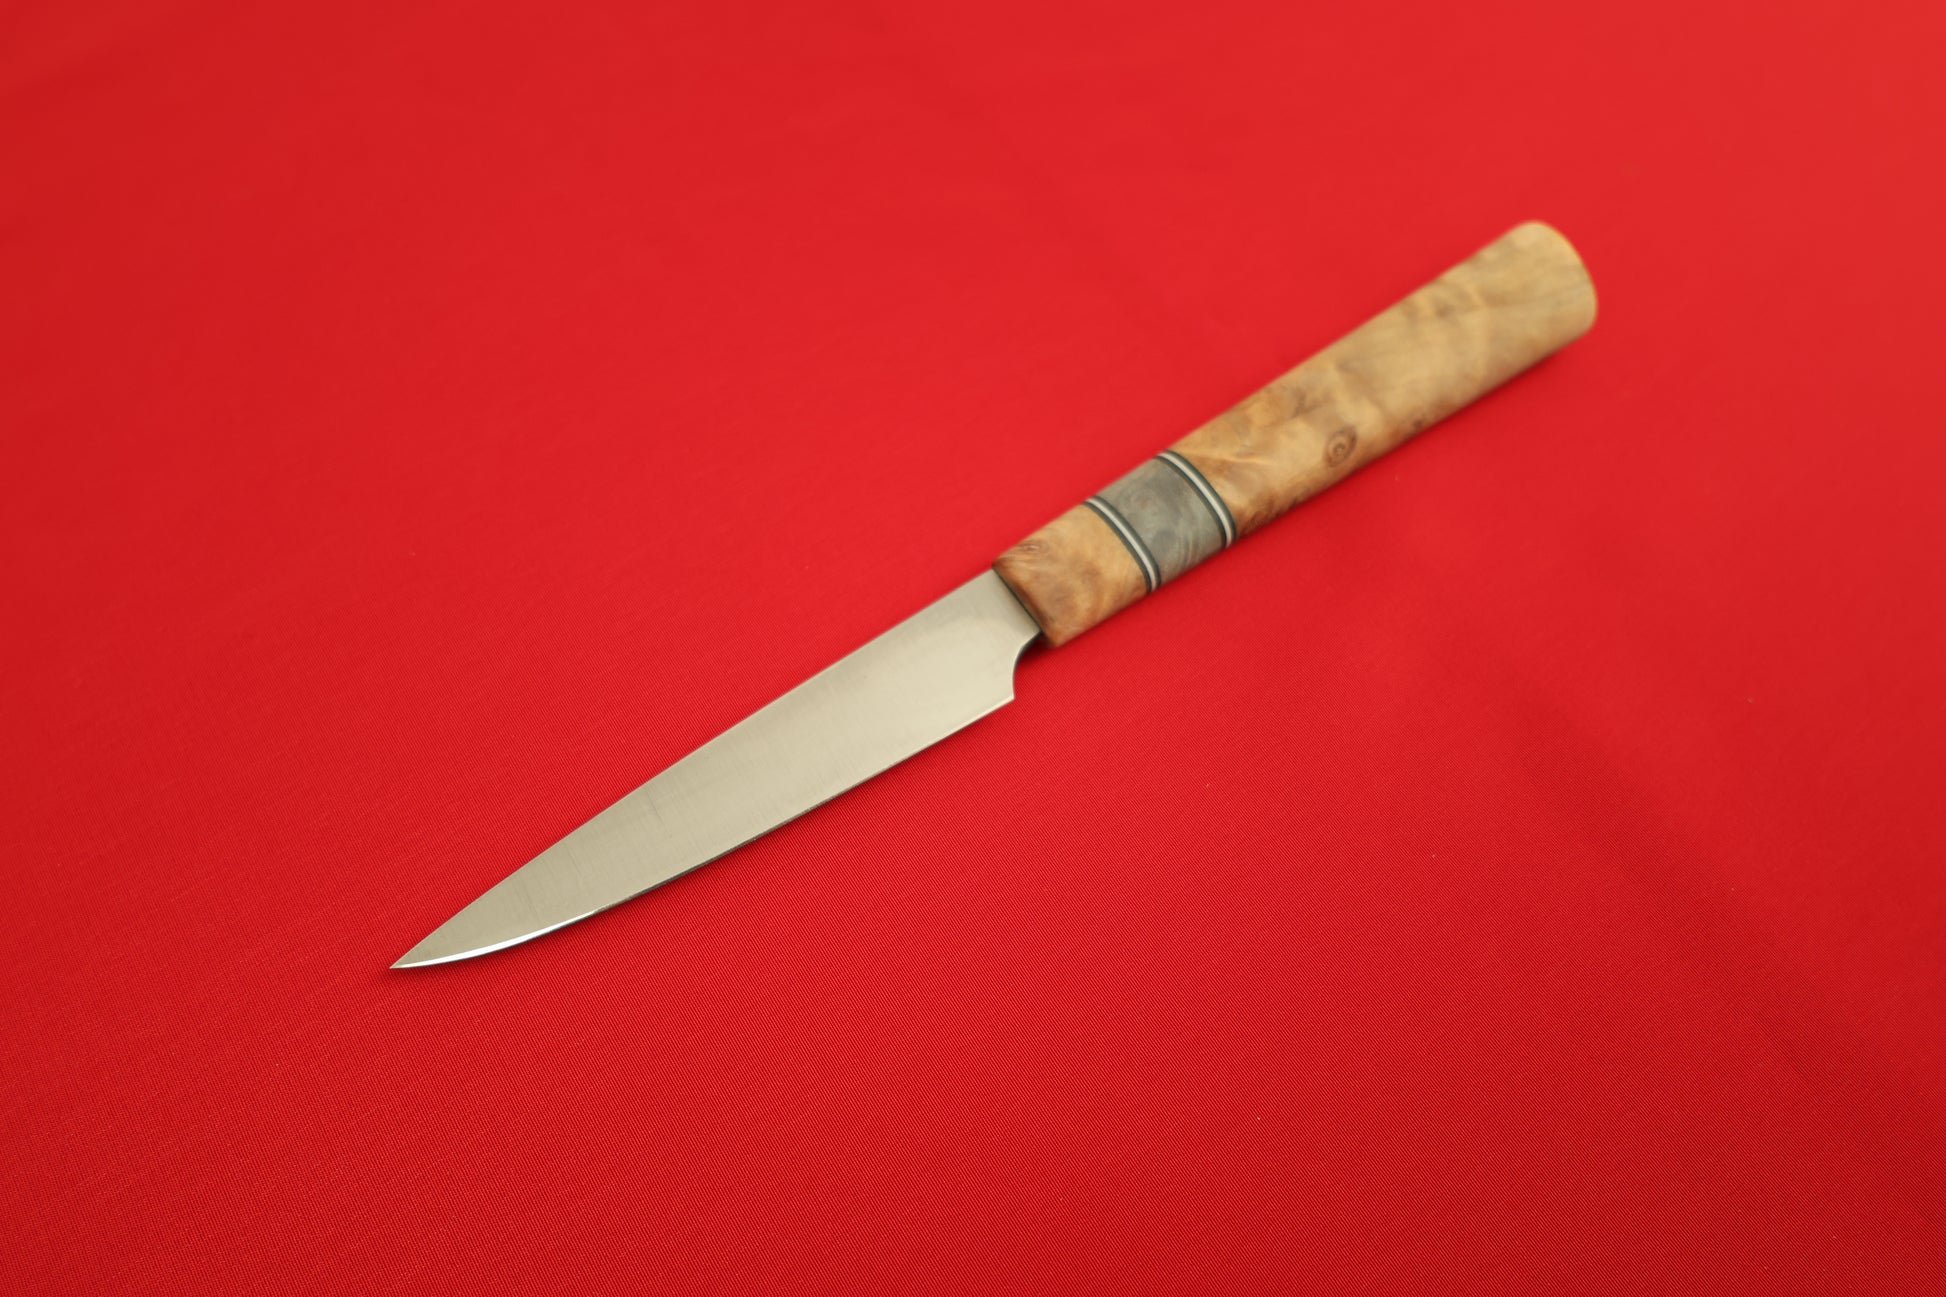 Paring knife with wooden handle on a red background.